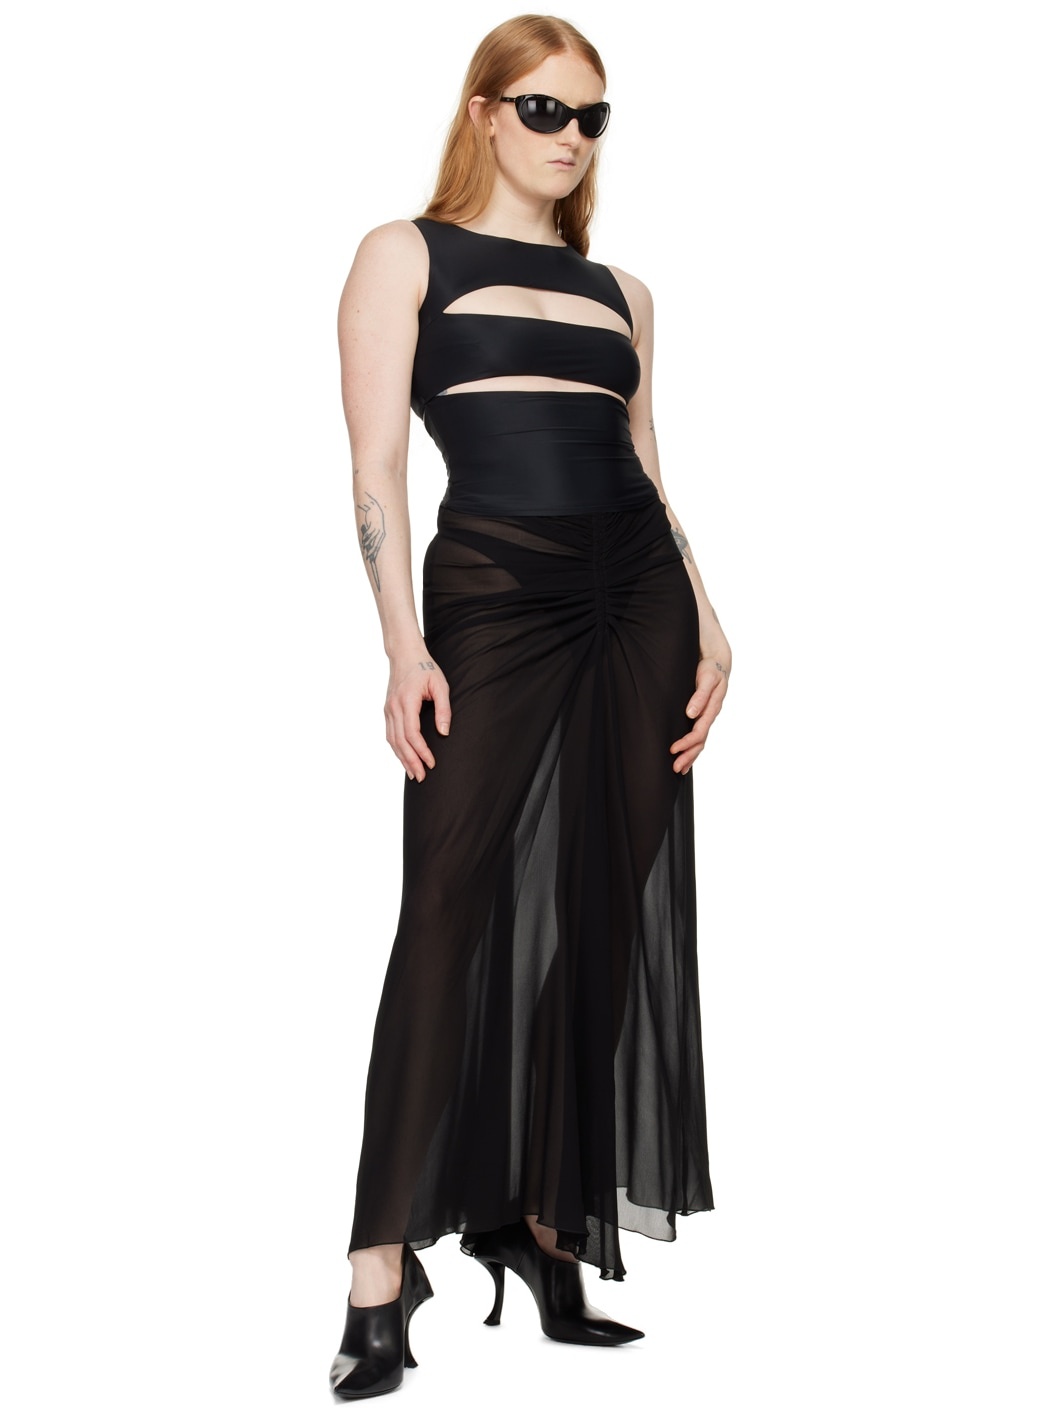 Black Ruched Maxi Skirt - 4